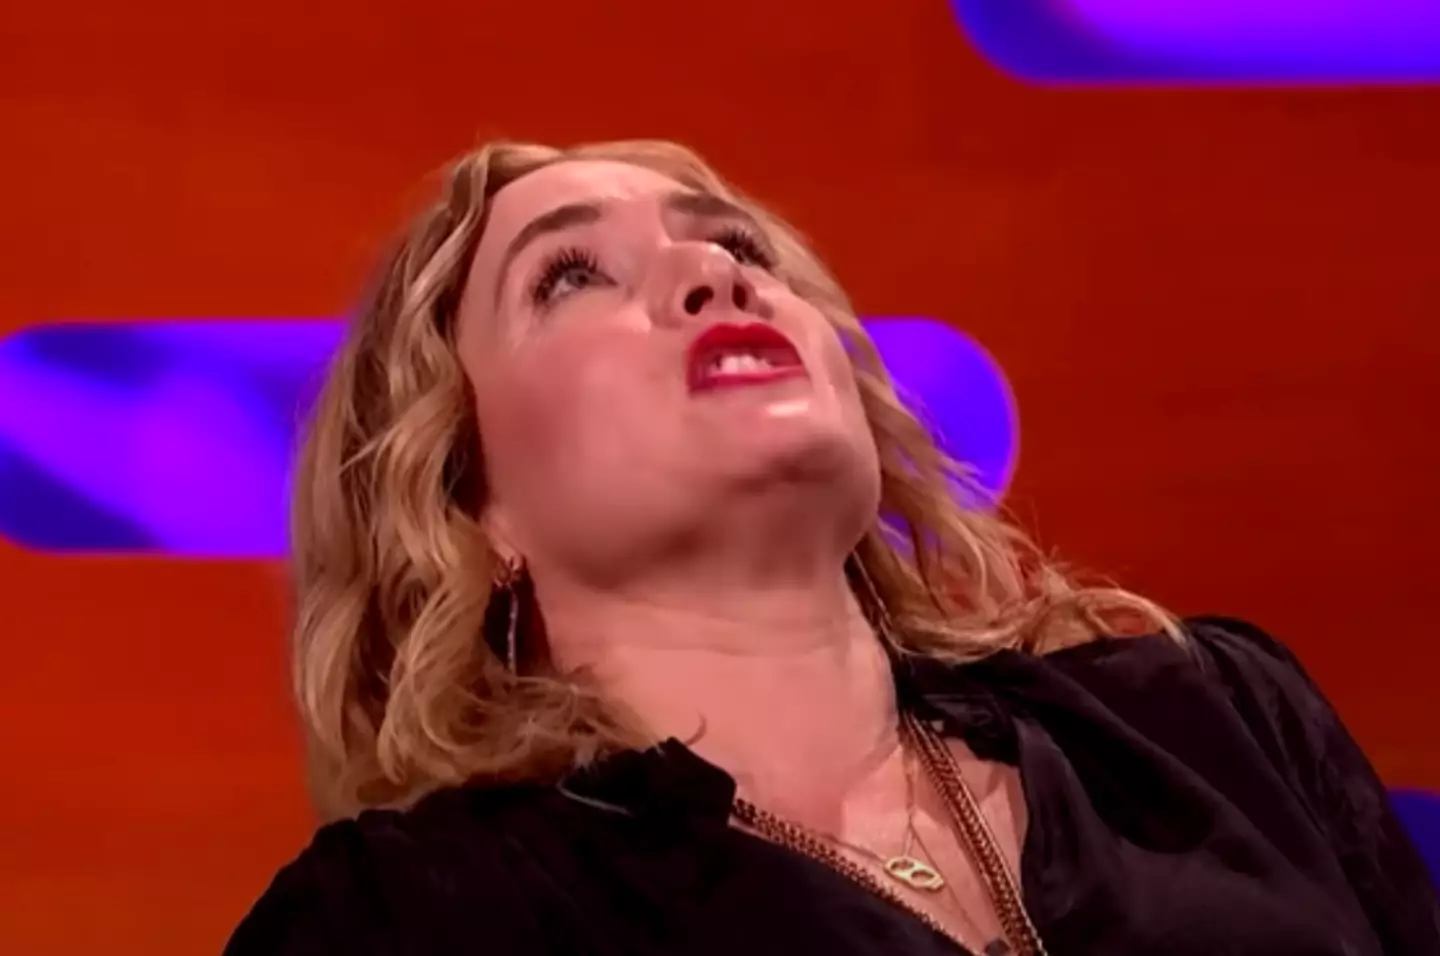 Winslet revealed she thankfully hadn't actually pooed herself on stage.